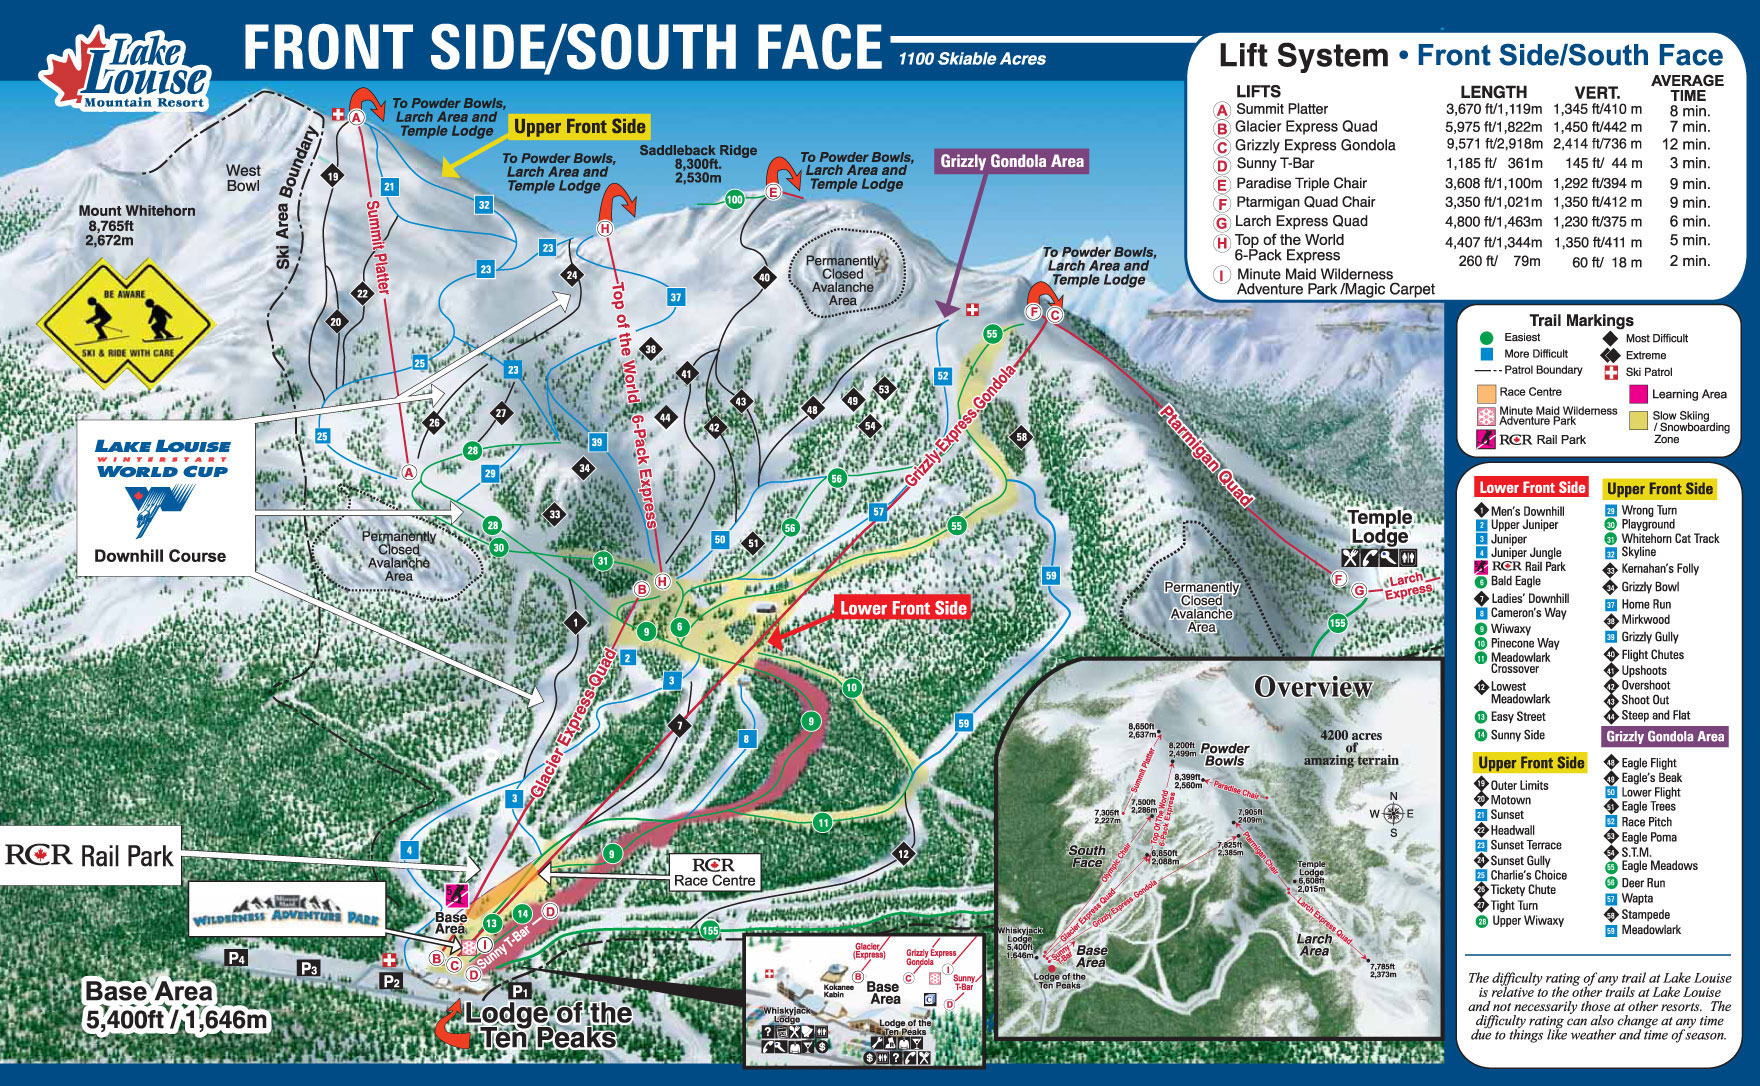 Lake Louise Piste Map - Front Side/South Face